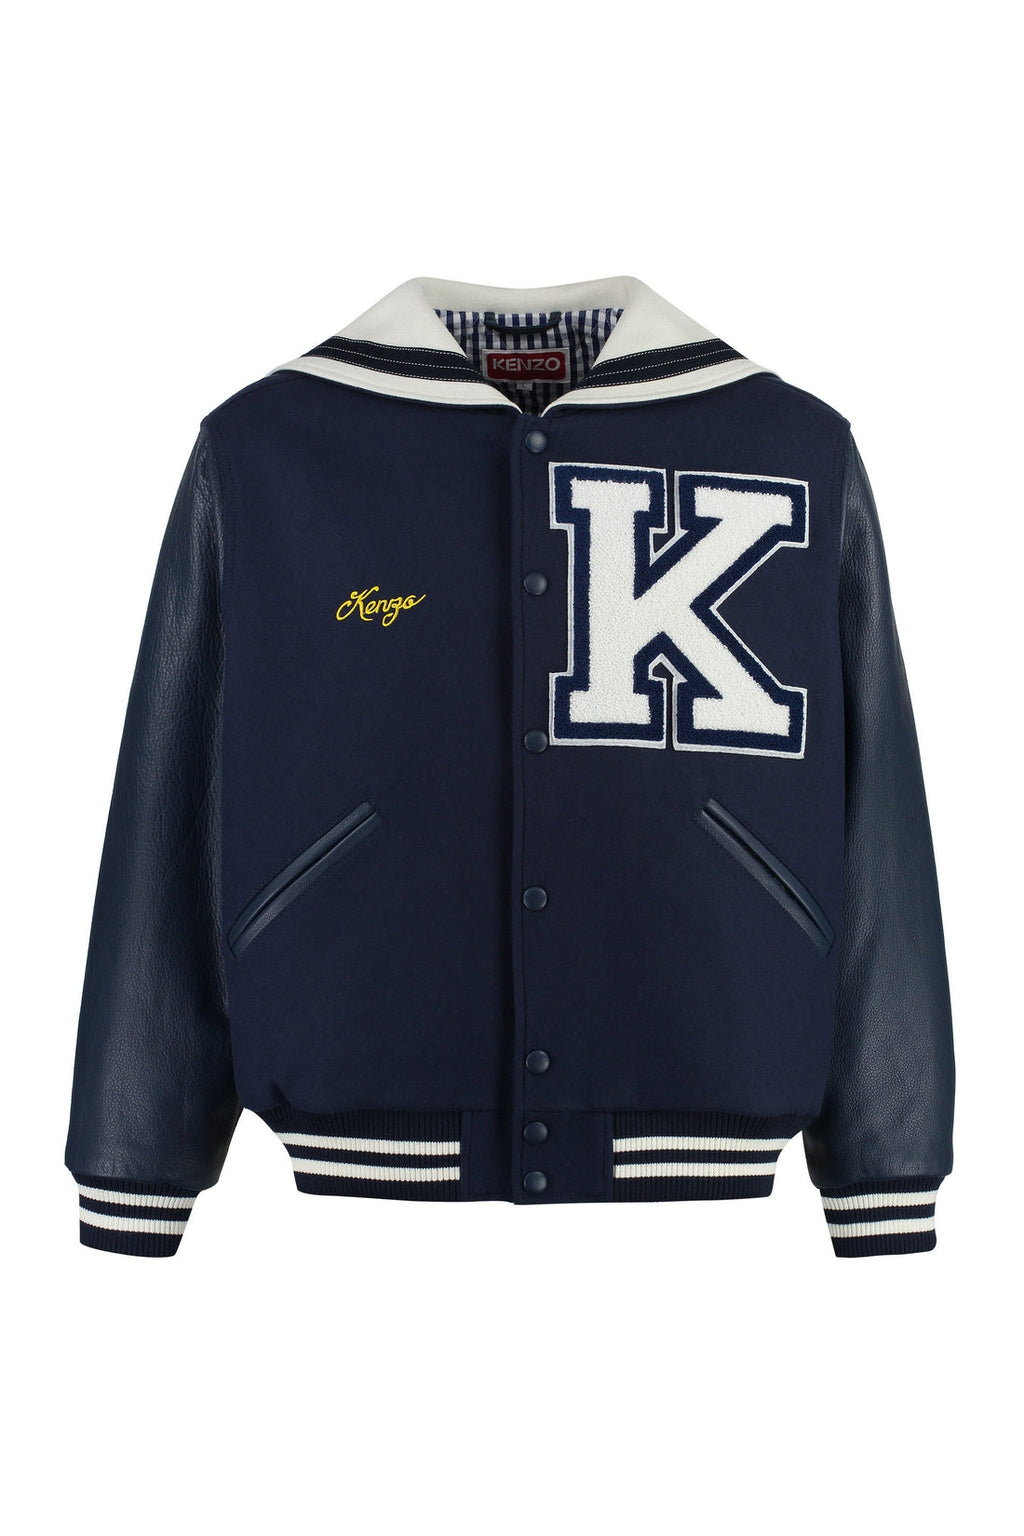 Kenzo-OUTLET-SALE-Wool and leather bomber jacket-ARCHIVIST